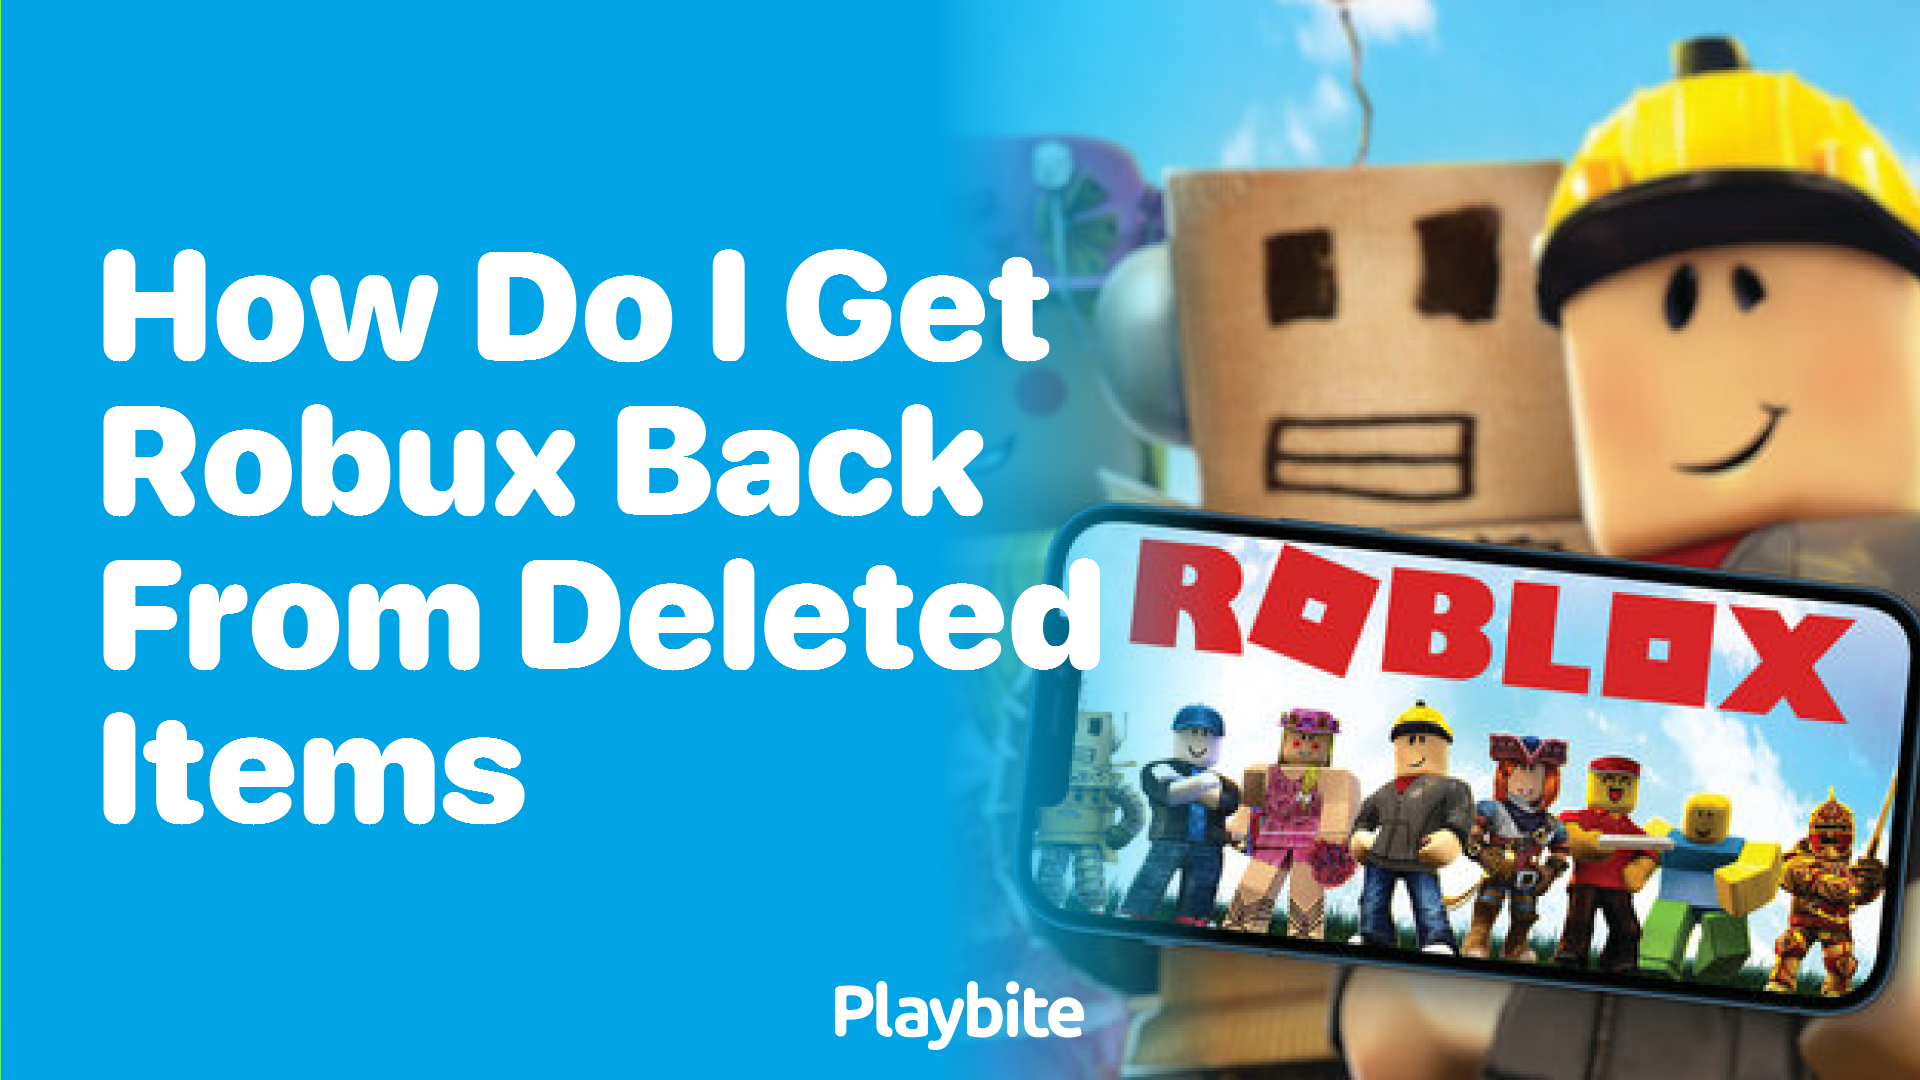 How Do I Get Robux Back from Deleted Items in Roblox?